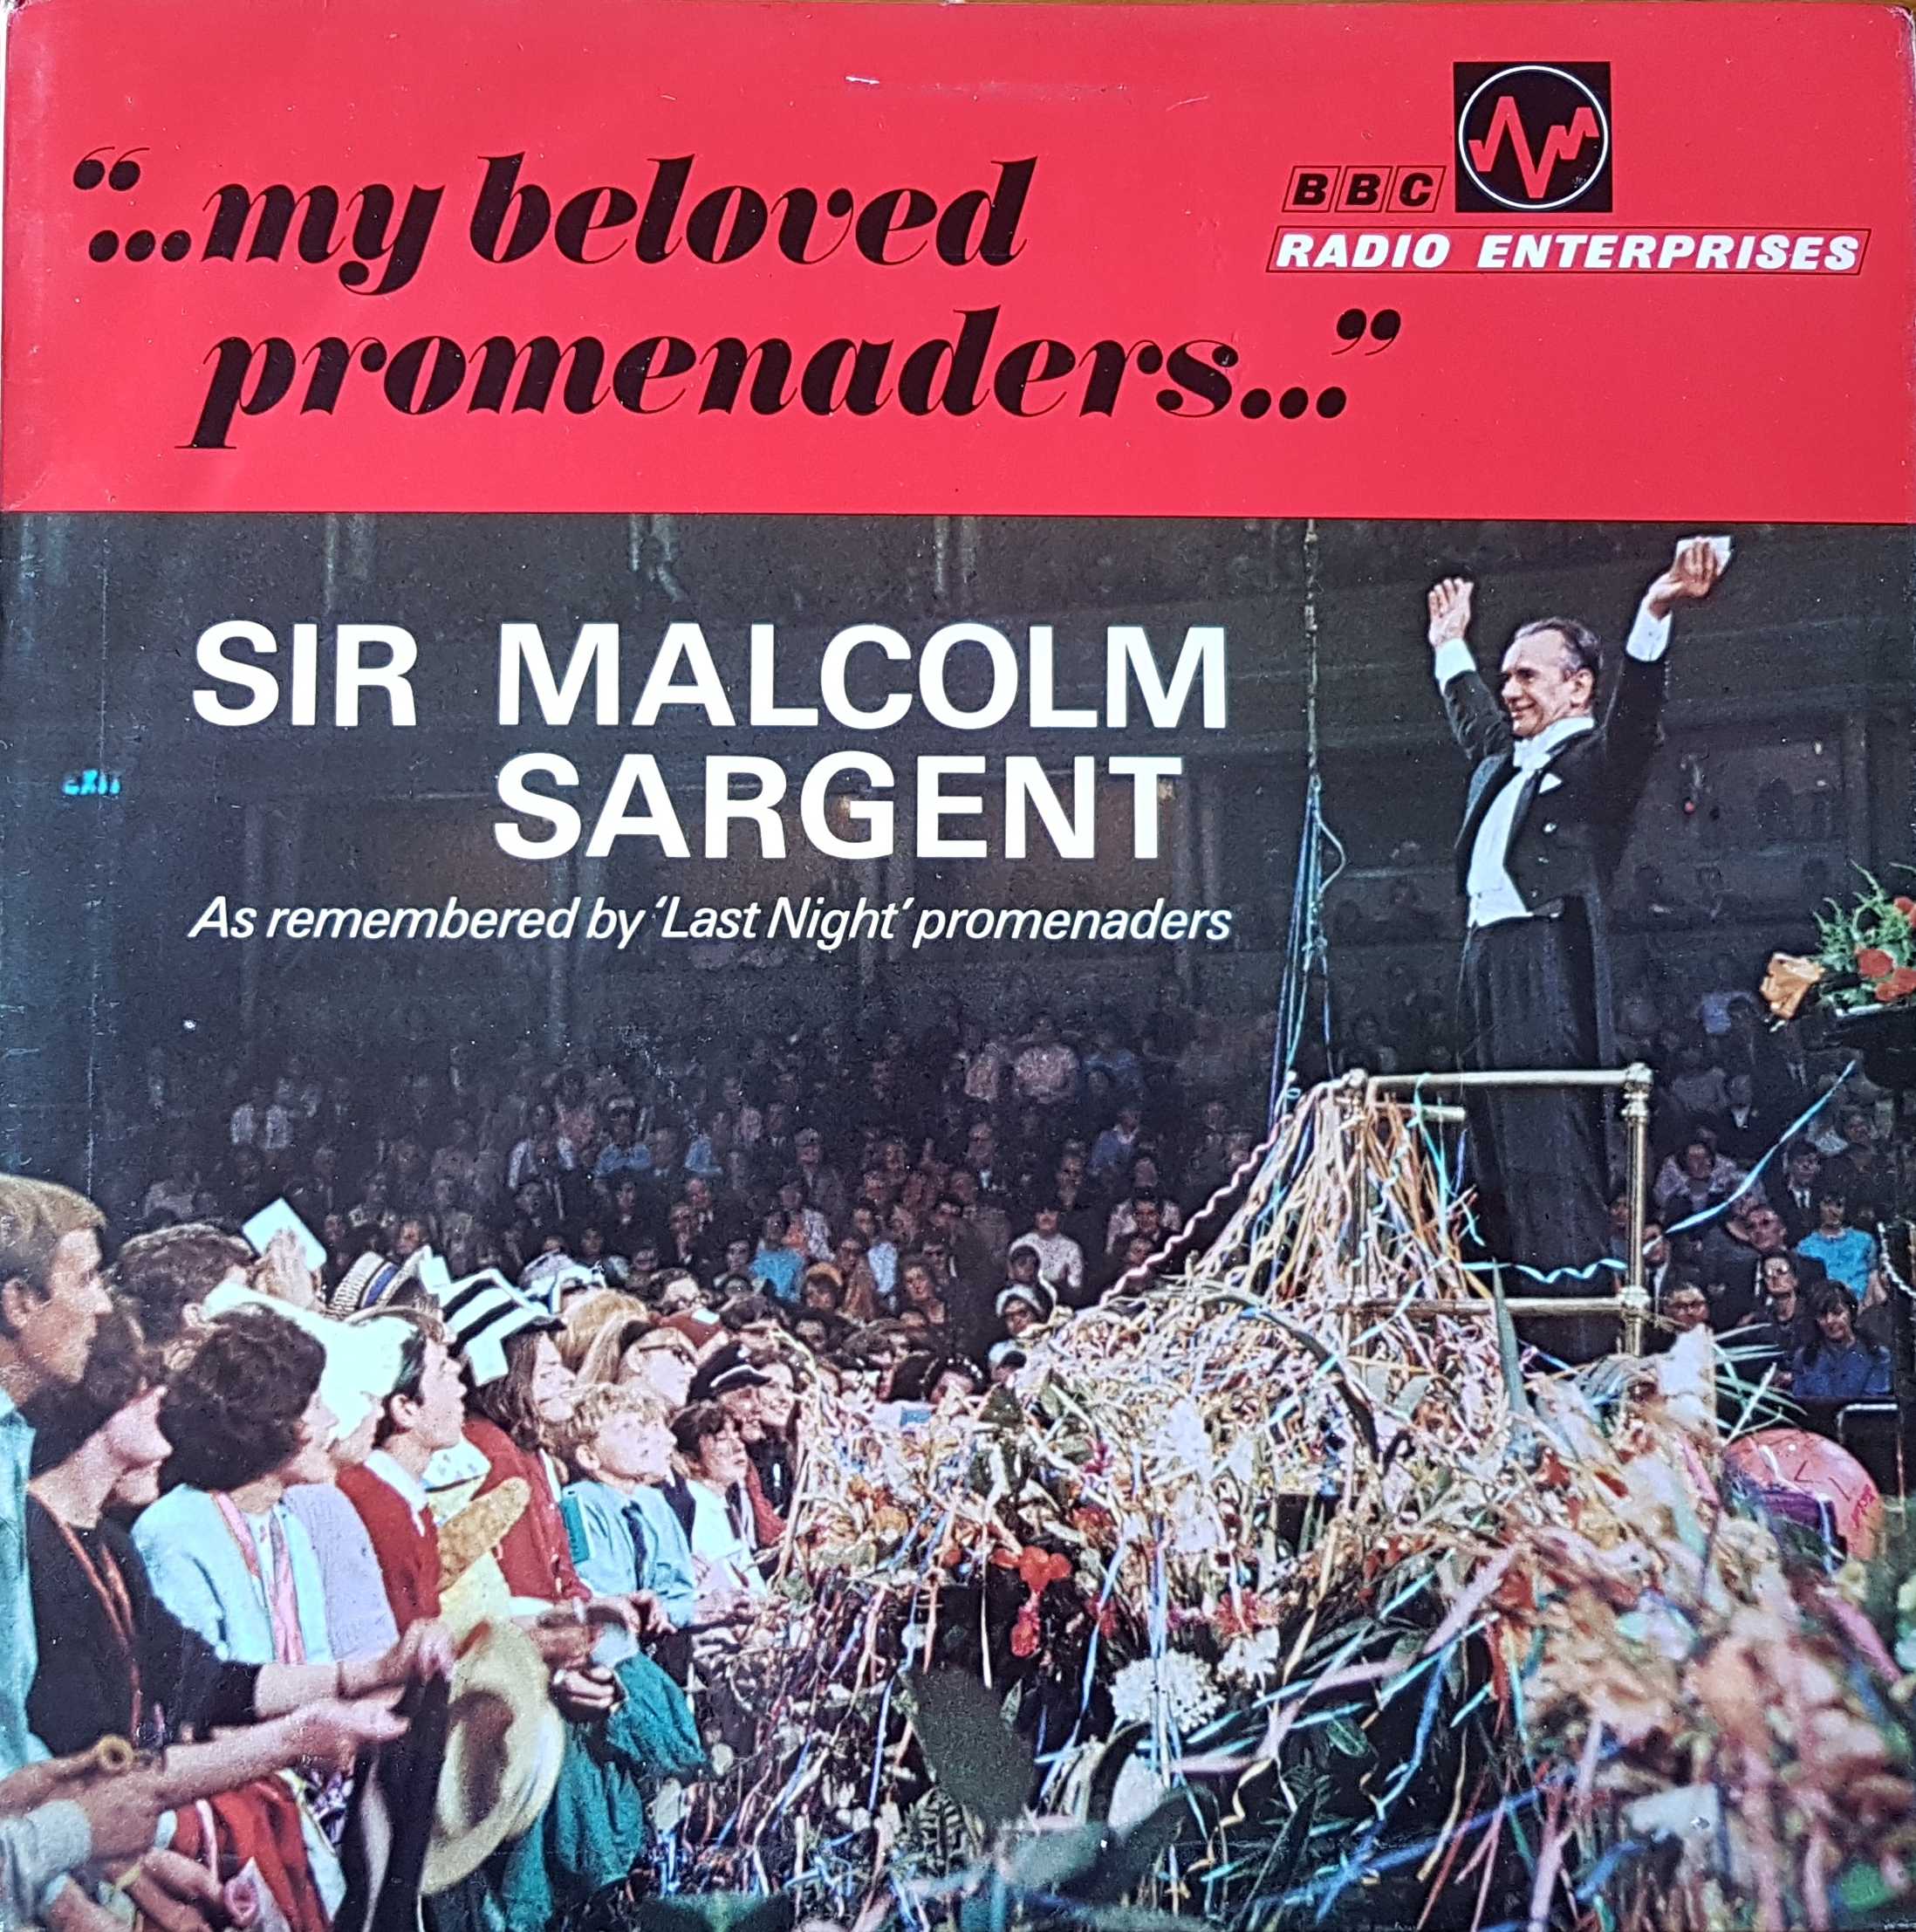 Picture of REC 22 ' My beloved promenaders ' - Sir Malcolm Sargent by artist Sir Malcolm Sargent from the BBC albums - Records and Tapes library